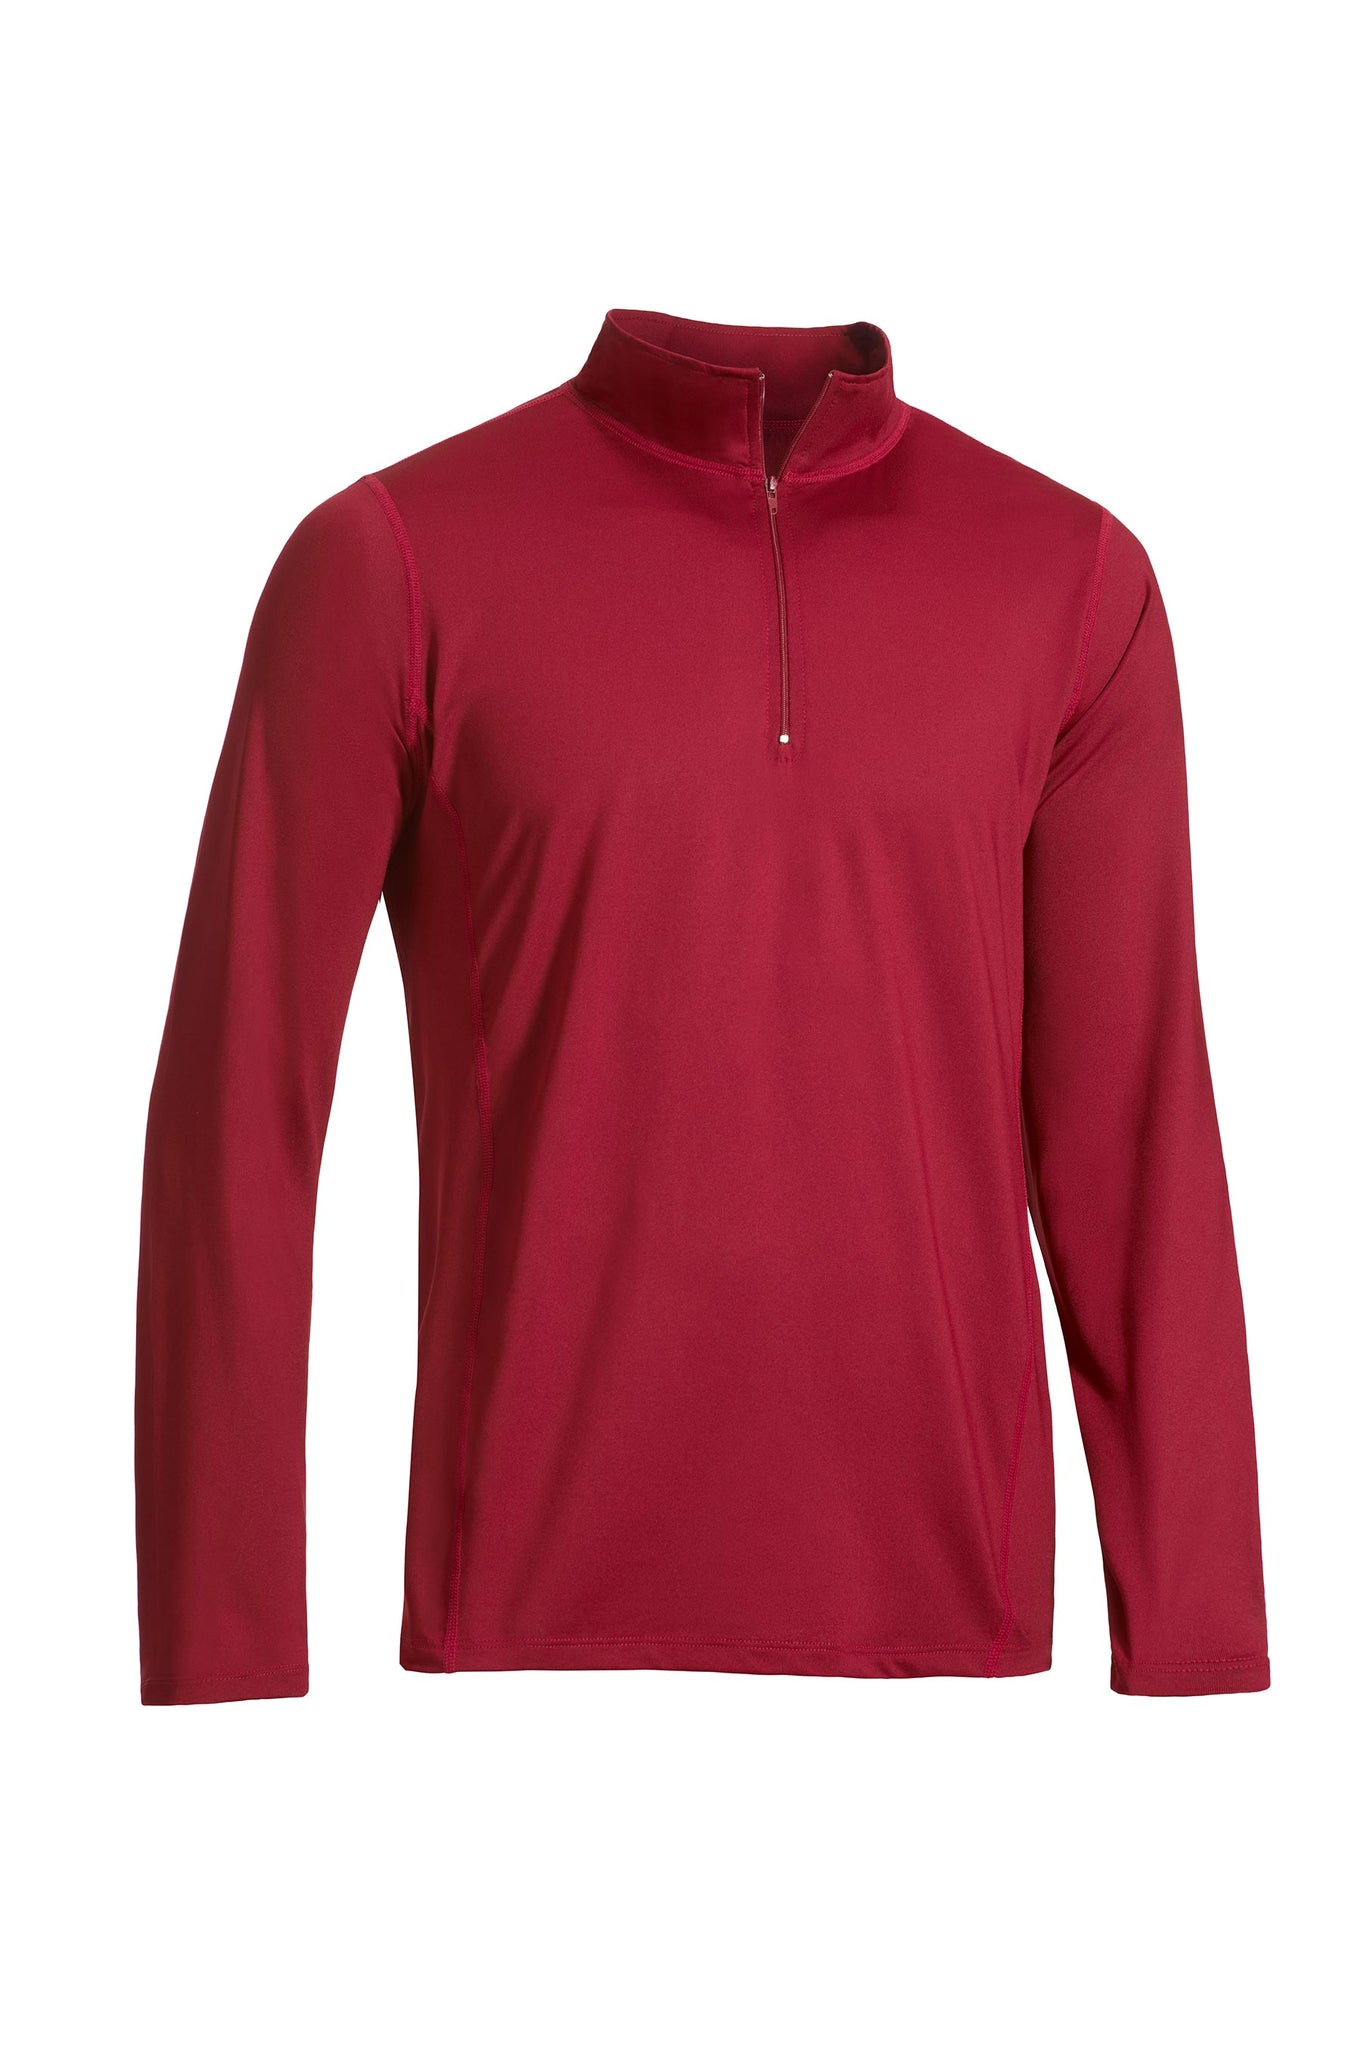 AU905🇺🇸 1/4 Zip Pullover Track Training Top - Expert Brand